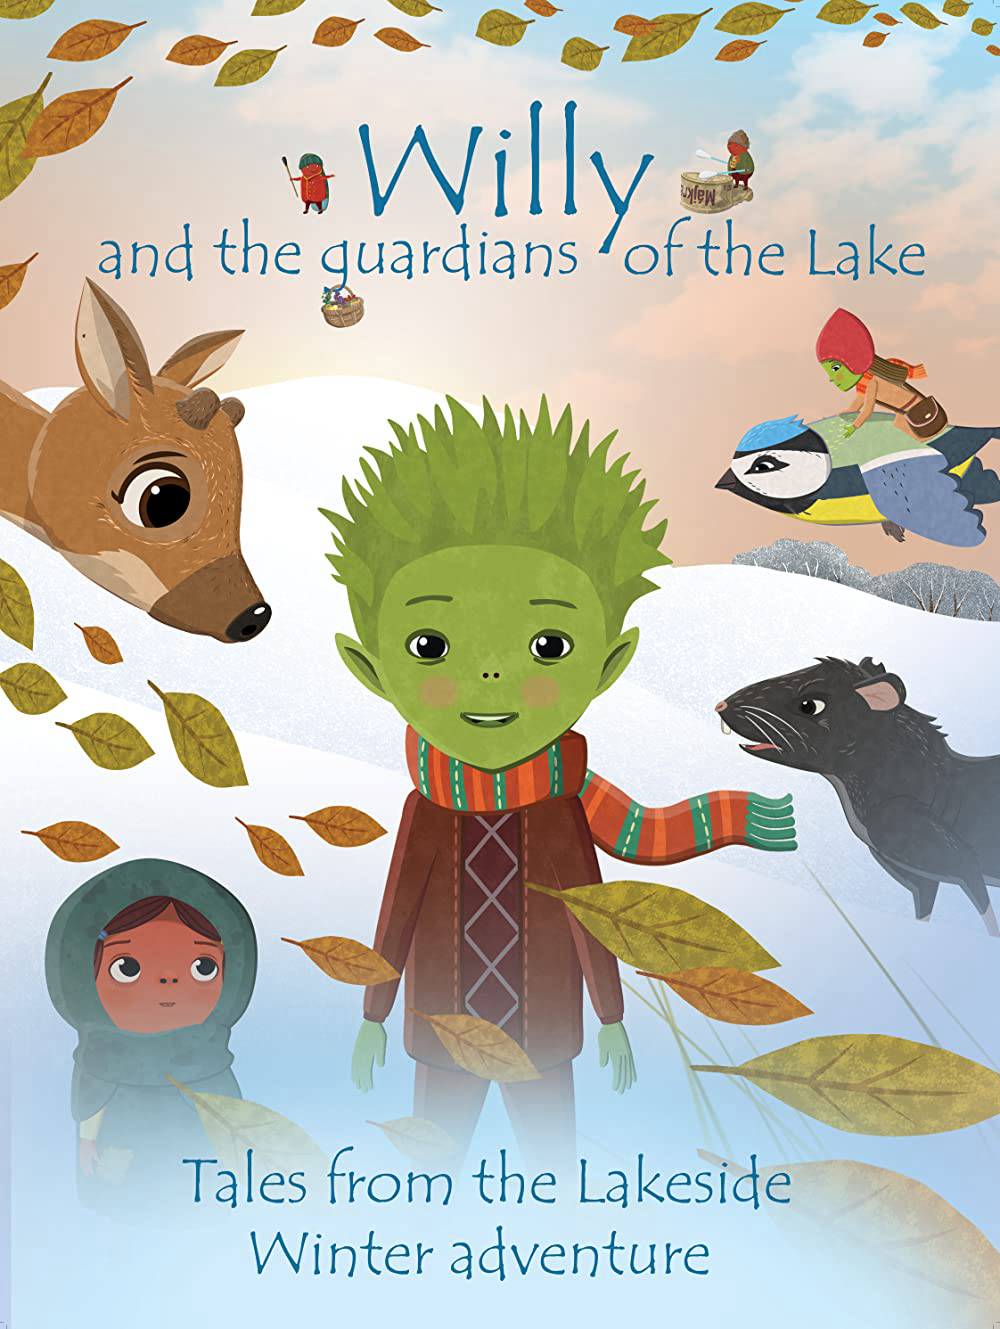 Xem Phim Willy và các vệ sĩ ven hồ (Willy and the Guardians of the Lake: Tales from the Lakeside Winter Adventure)